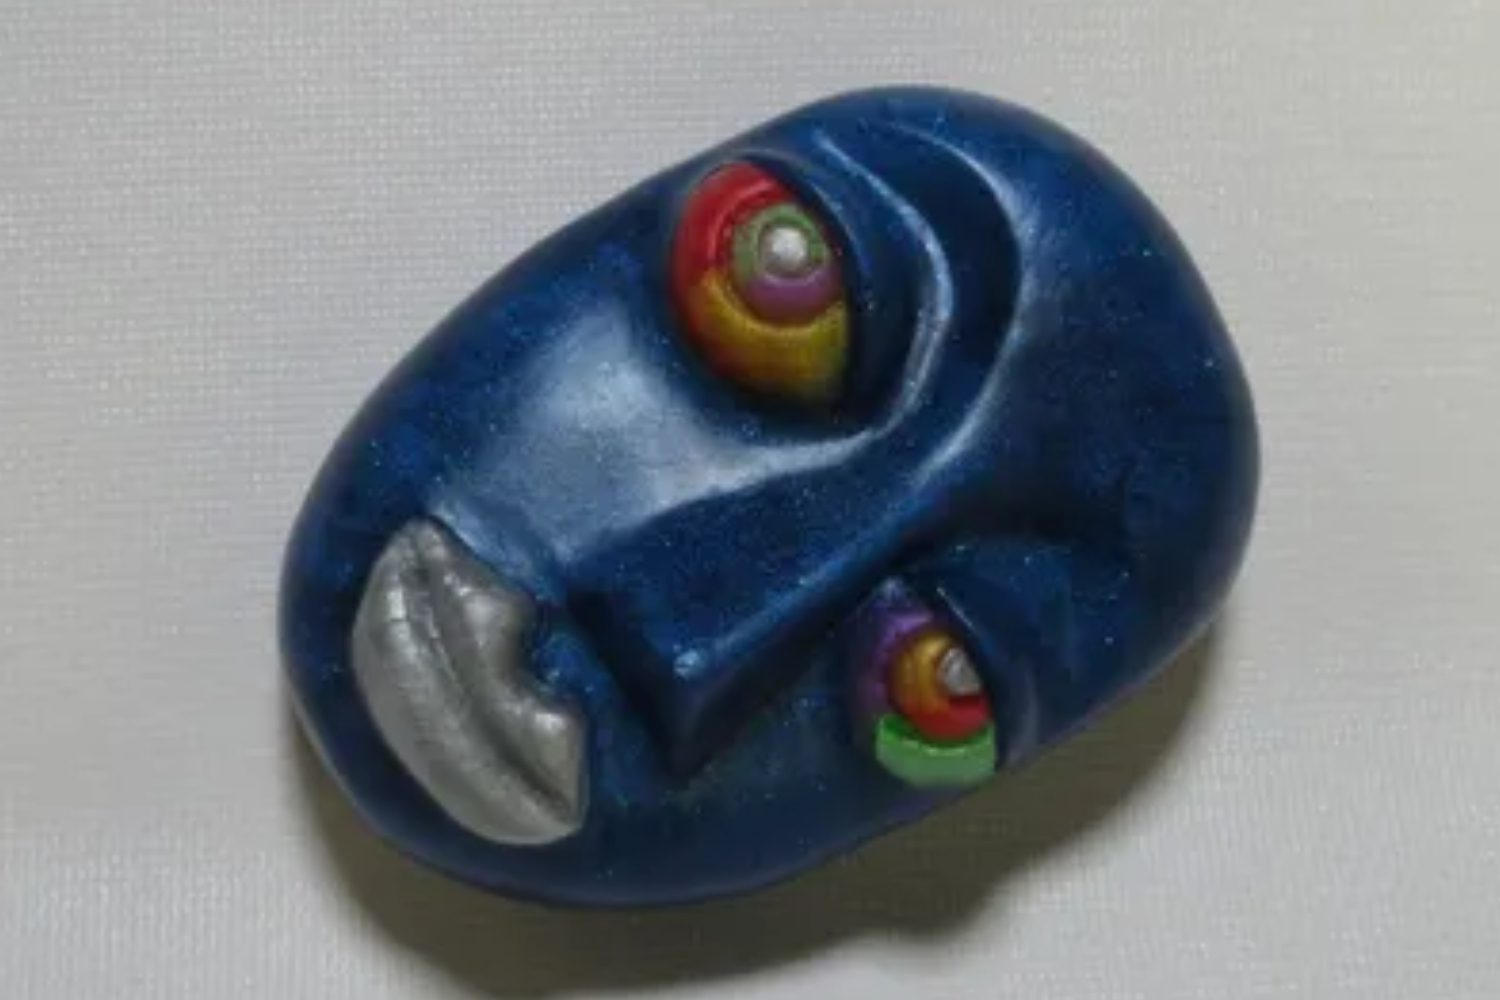 A blue face with colorful eyes and silver rim.